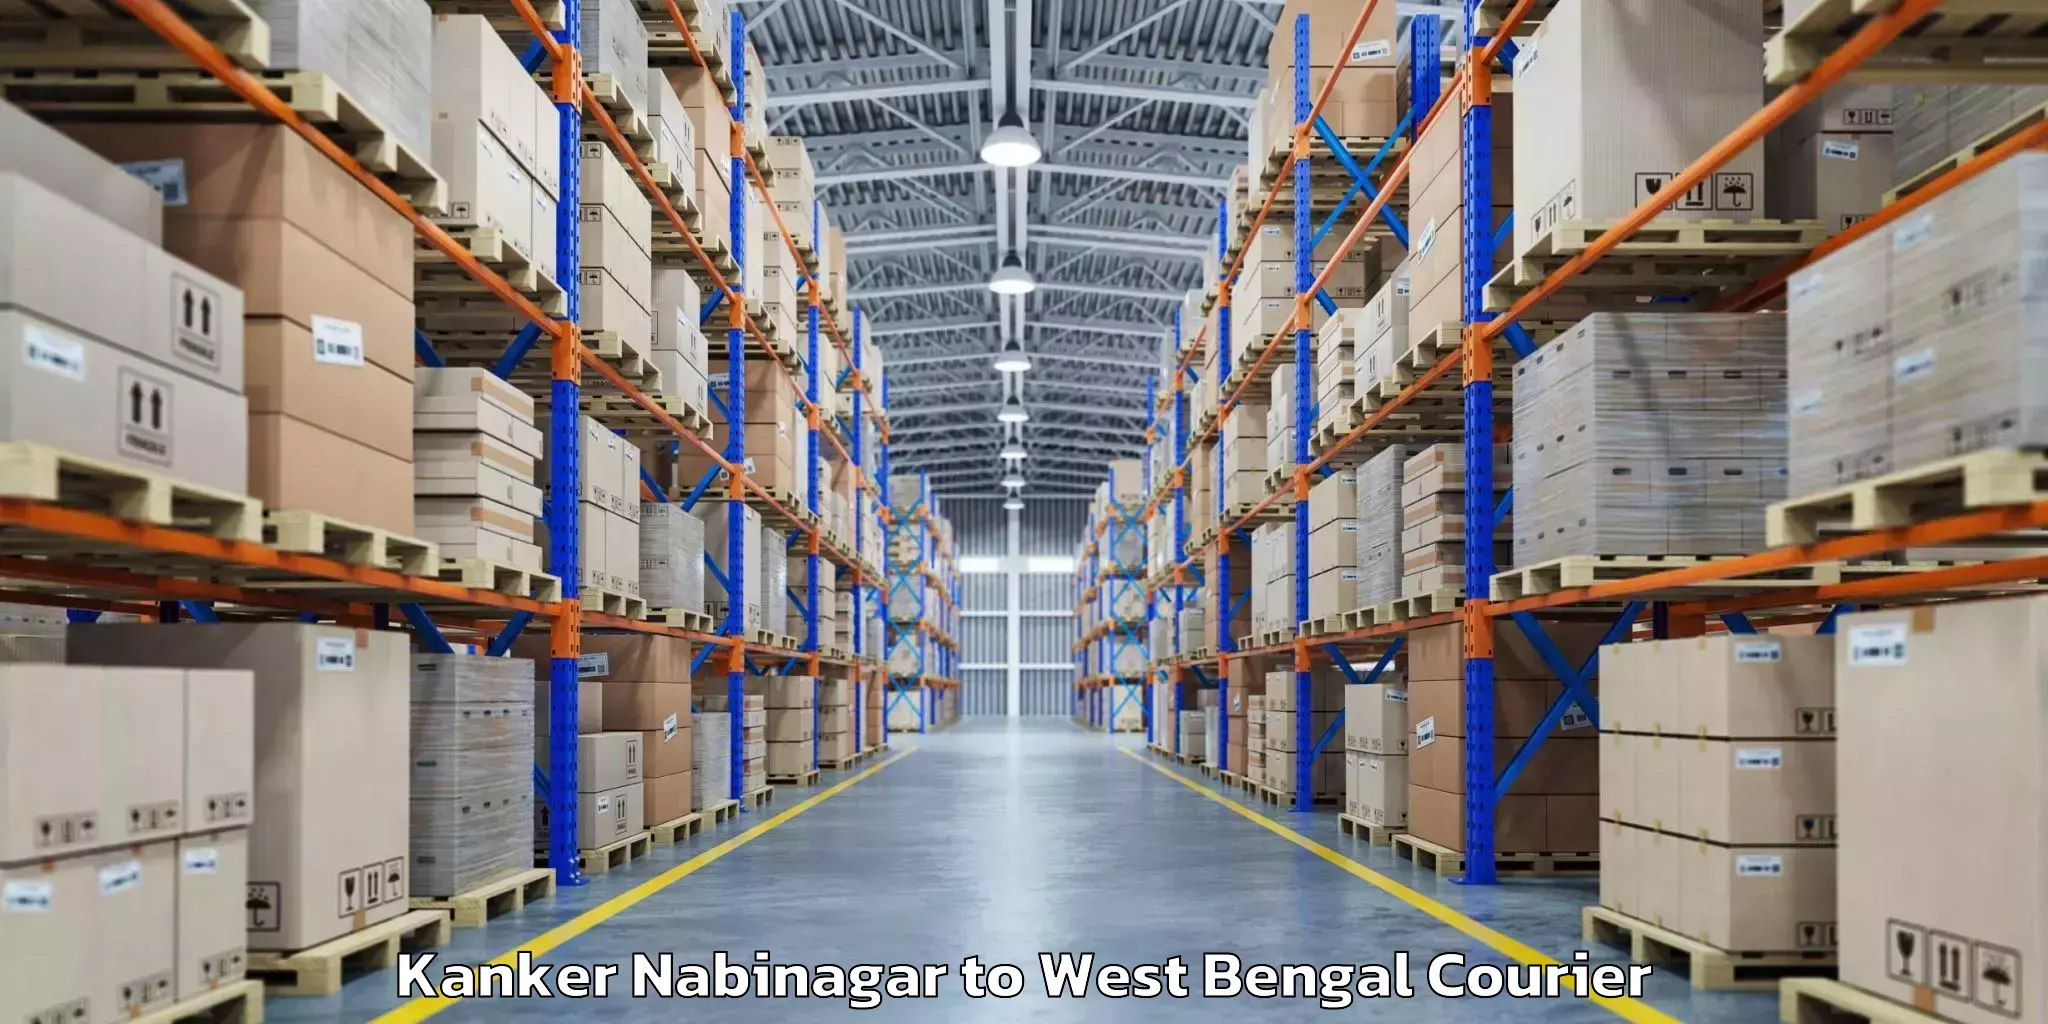 Baggage relocation service in Kanker Nabinagar to West Bengal